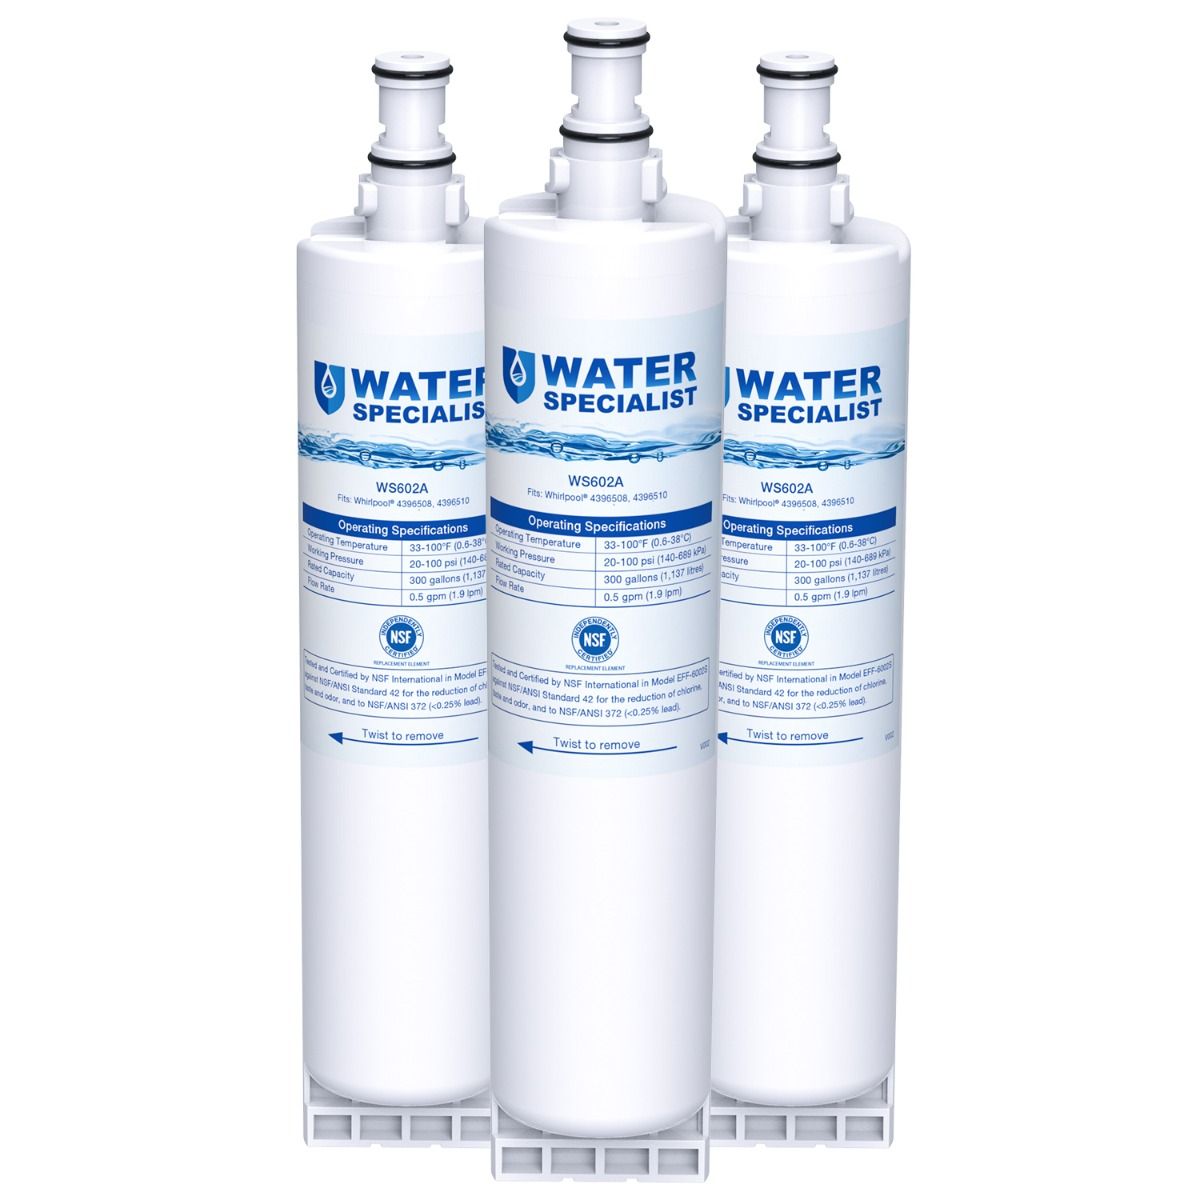 2305768 2255518 Refrigerator Water Filter Compatible With Whirlpool 4396510P 